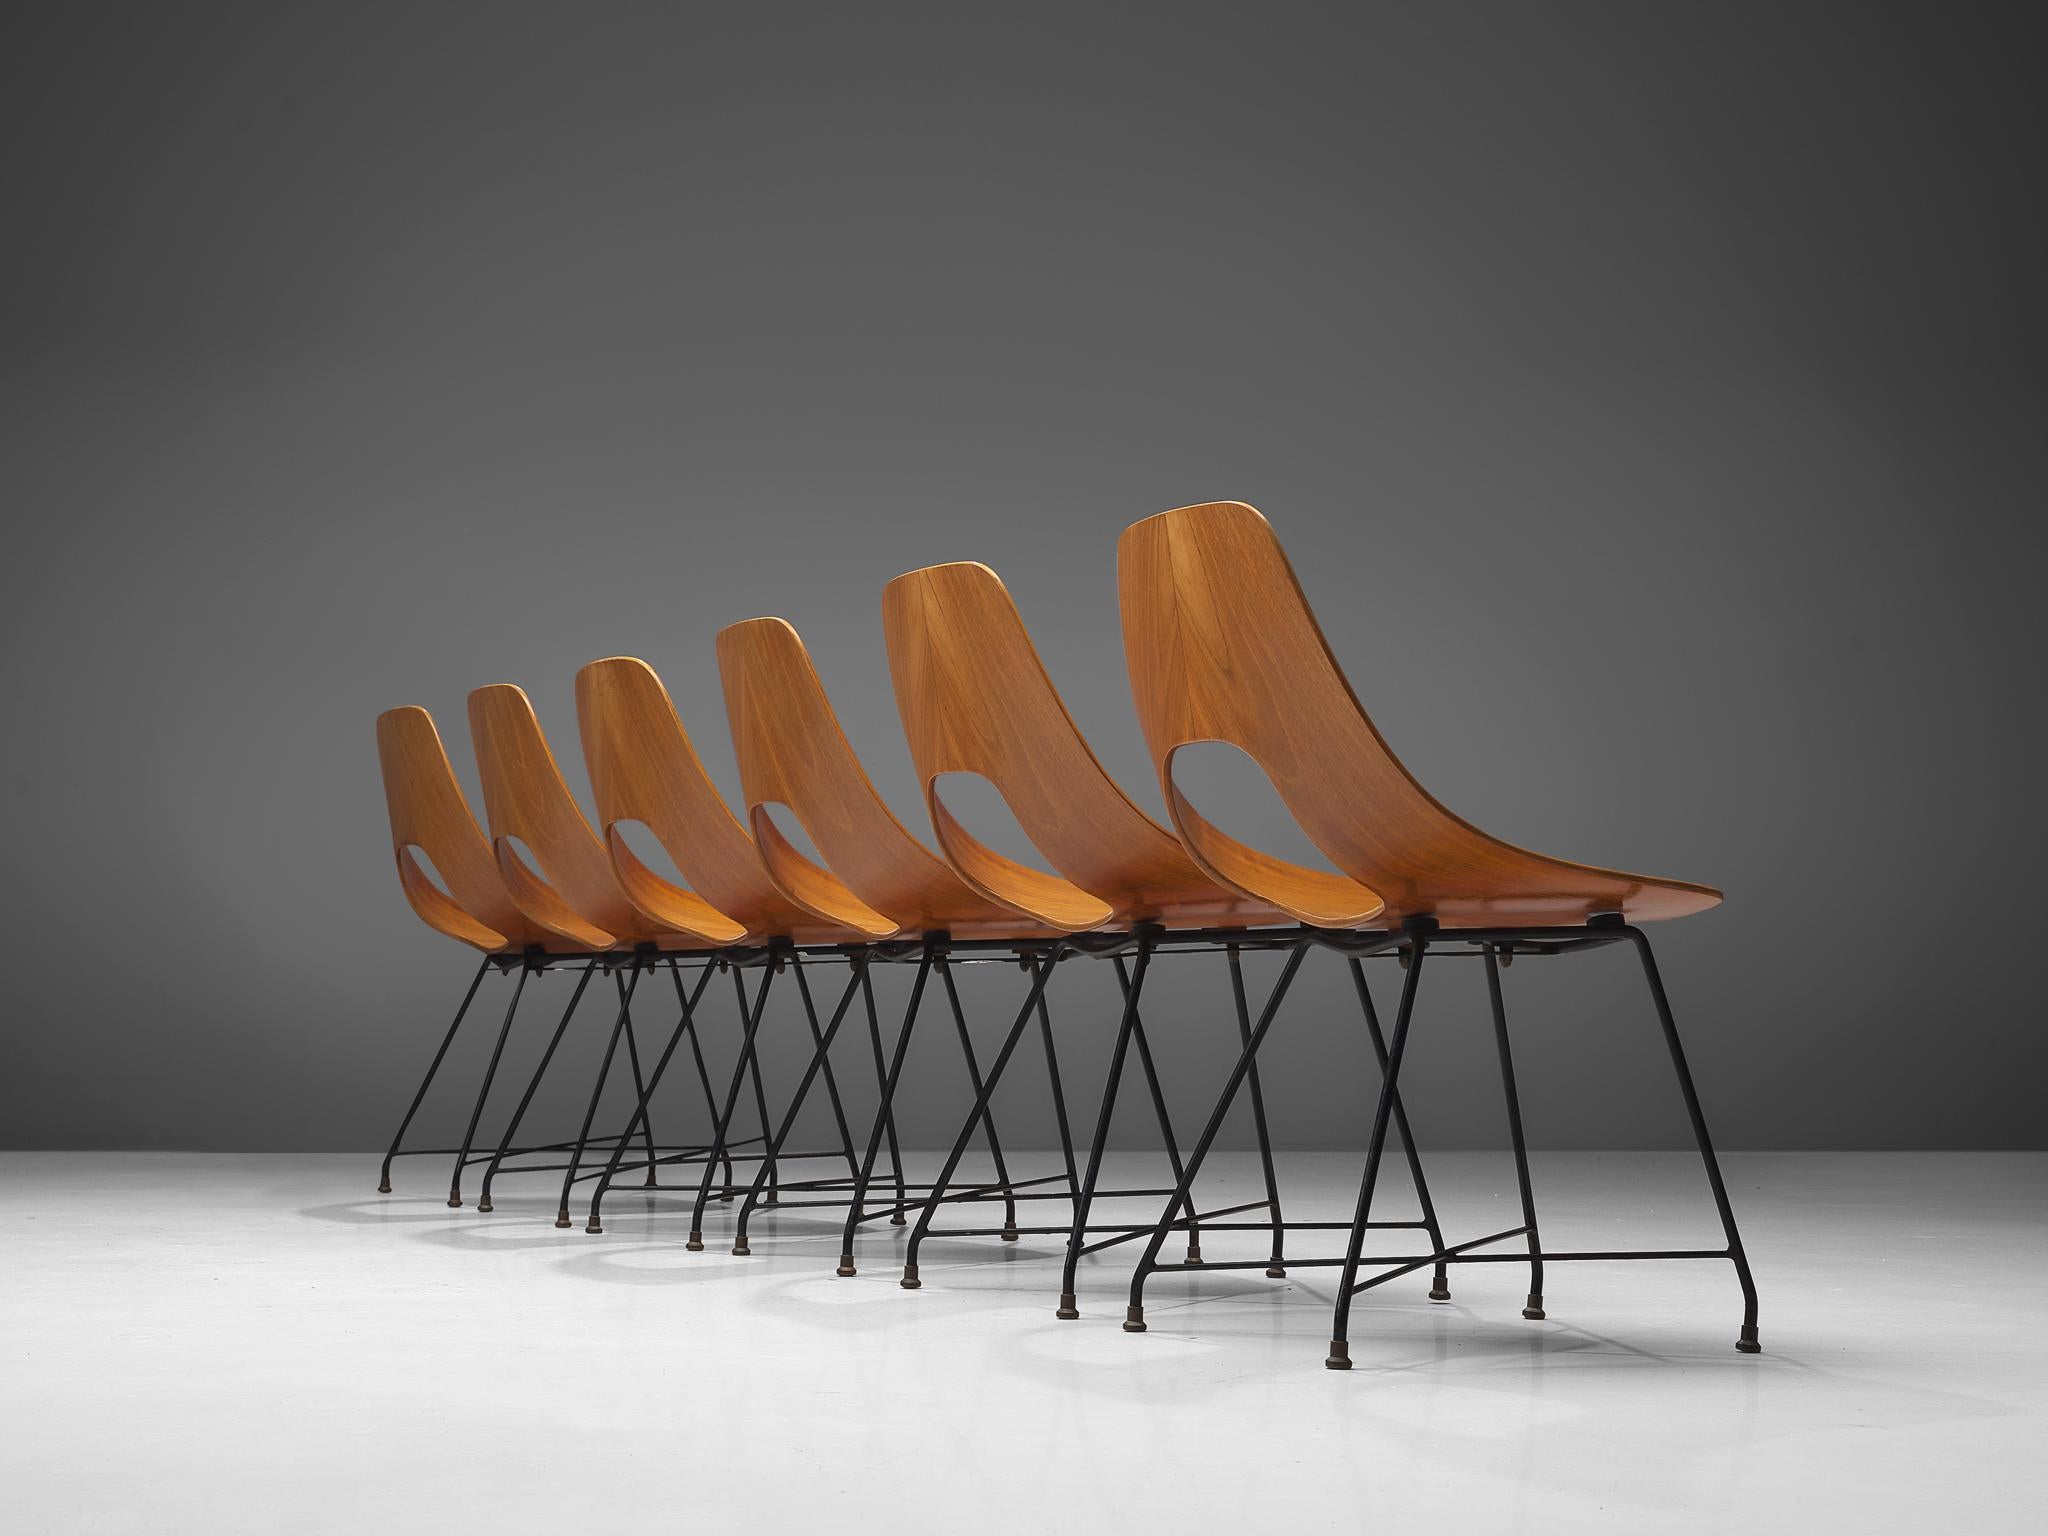 Augusto Bozzi for Saporiti, set of six 'Ariston' dining chairs, teak, steel and brass, Italy, 1957.

Elegant set of six 'Ariston' chairs designed by Augusto Bozzi for Saporiti. The chairs are made out of a solid bend plywood piece of teak in an